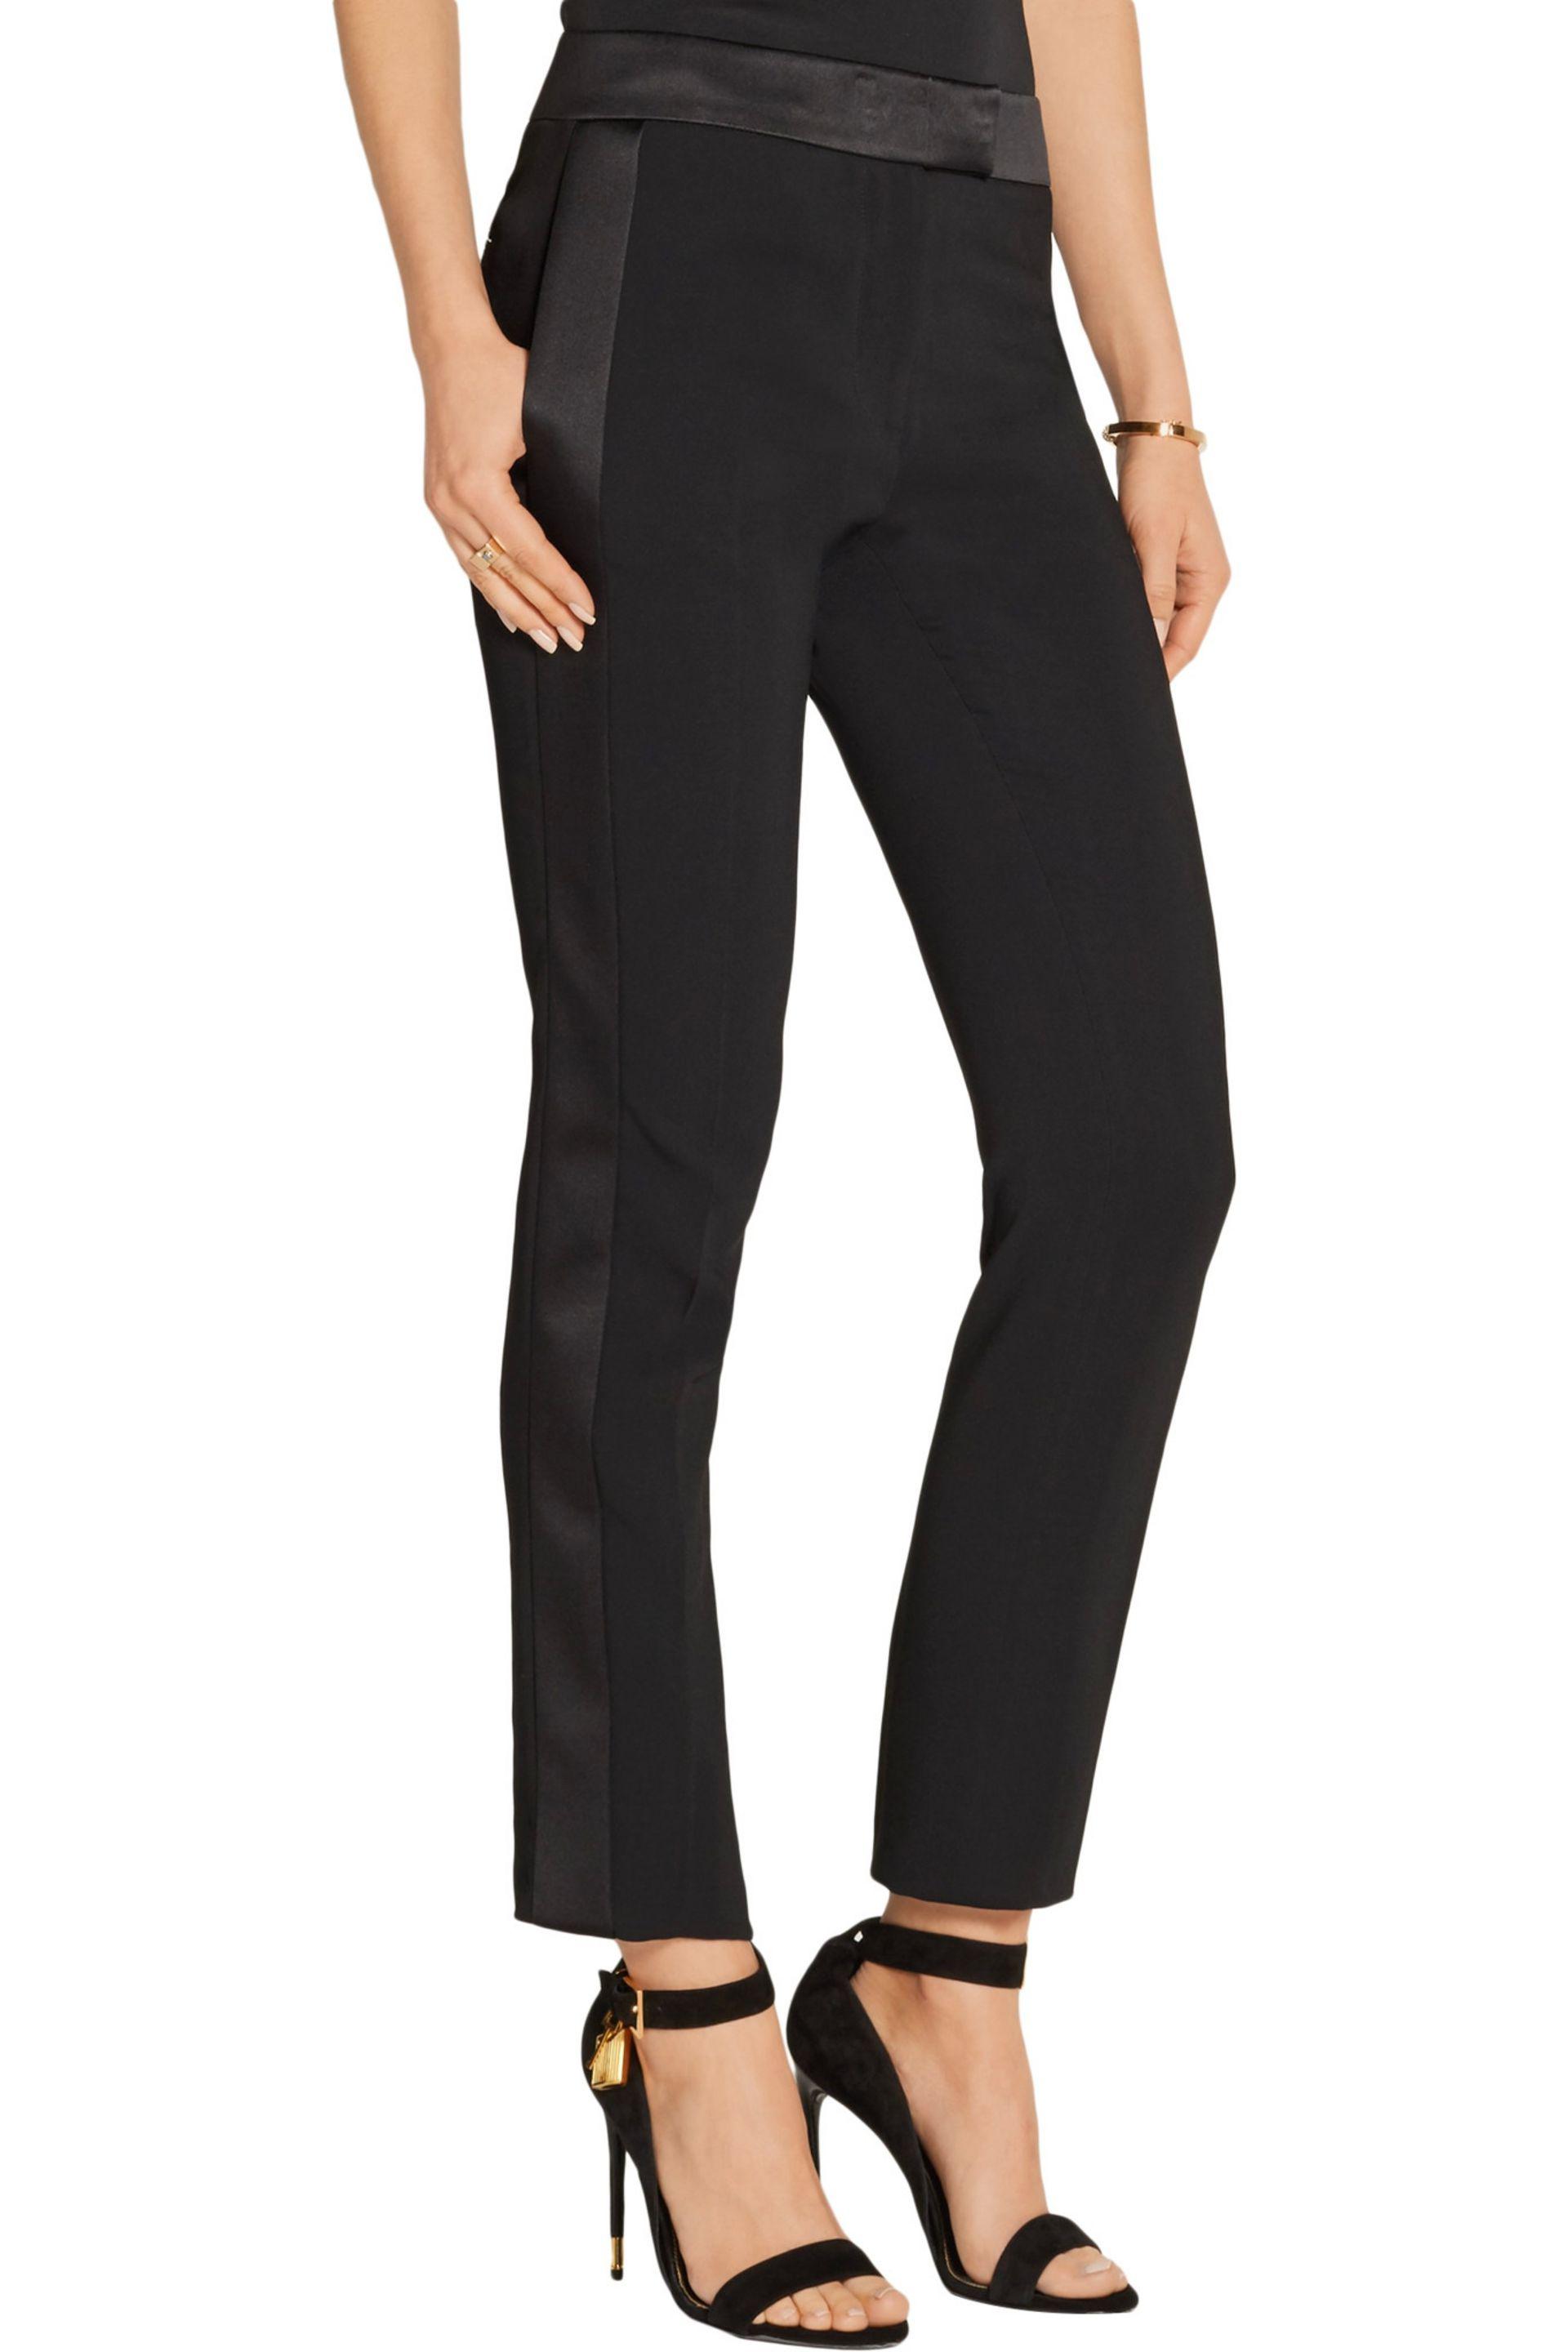 Lyst - Tom Ford Satin-trimmed Stretch-cady Straight-leg Tuxedo Pants in ...